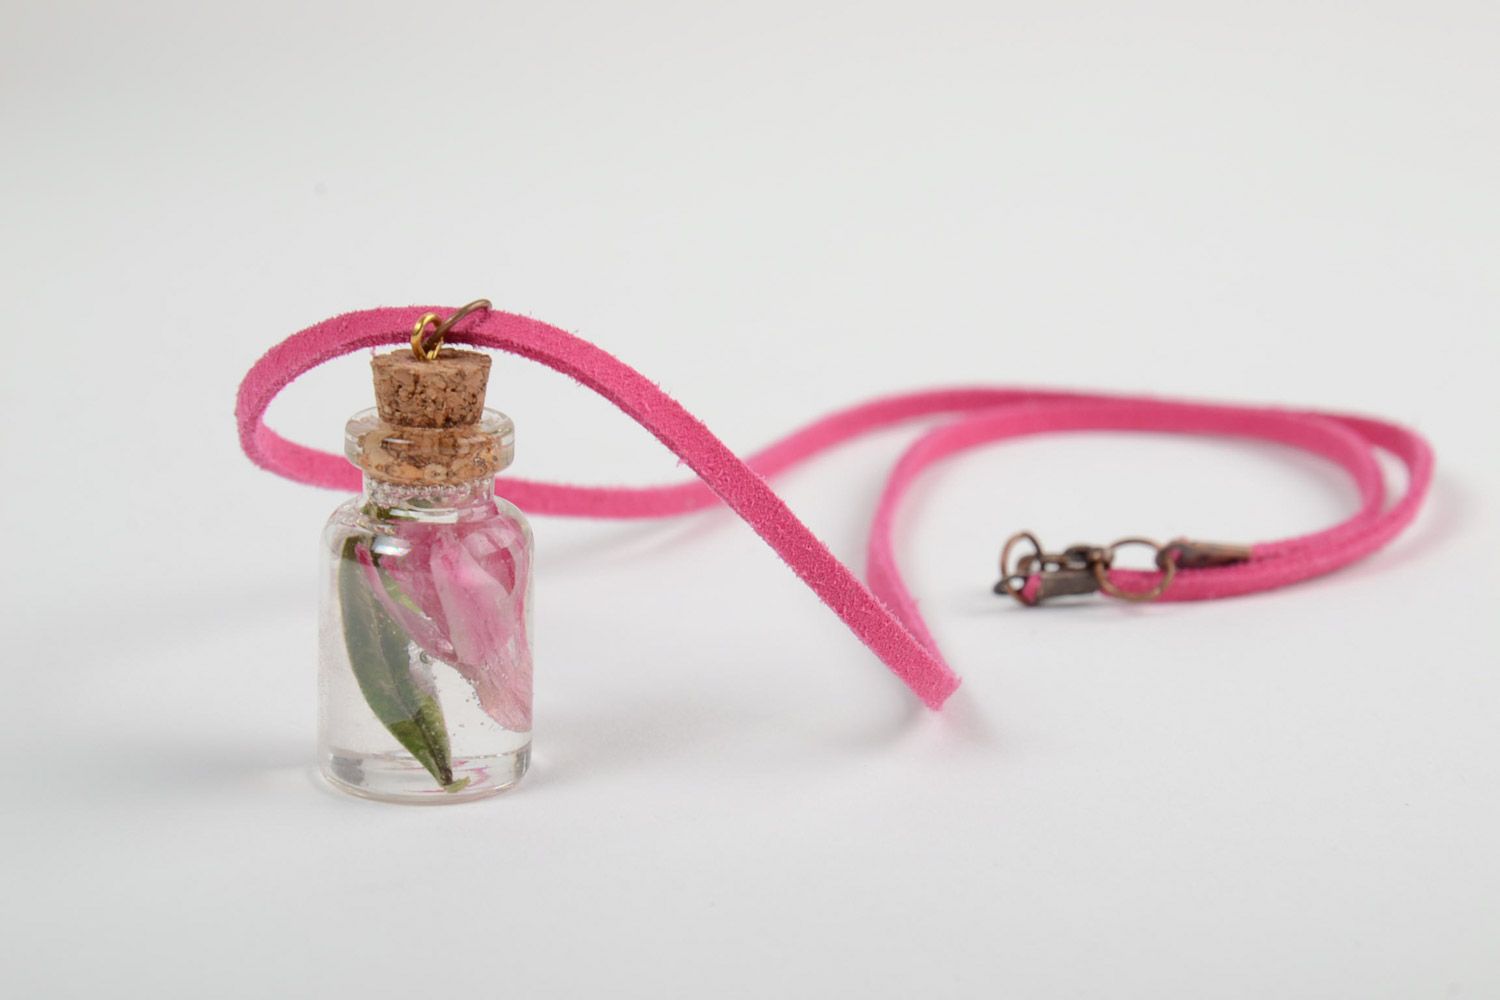 Handmade neck pendant with real flowers coated with epoxy resin in the shape of vial photo 4